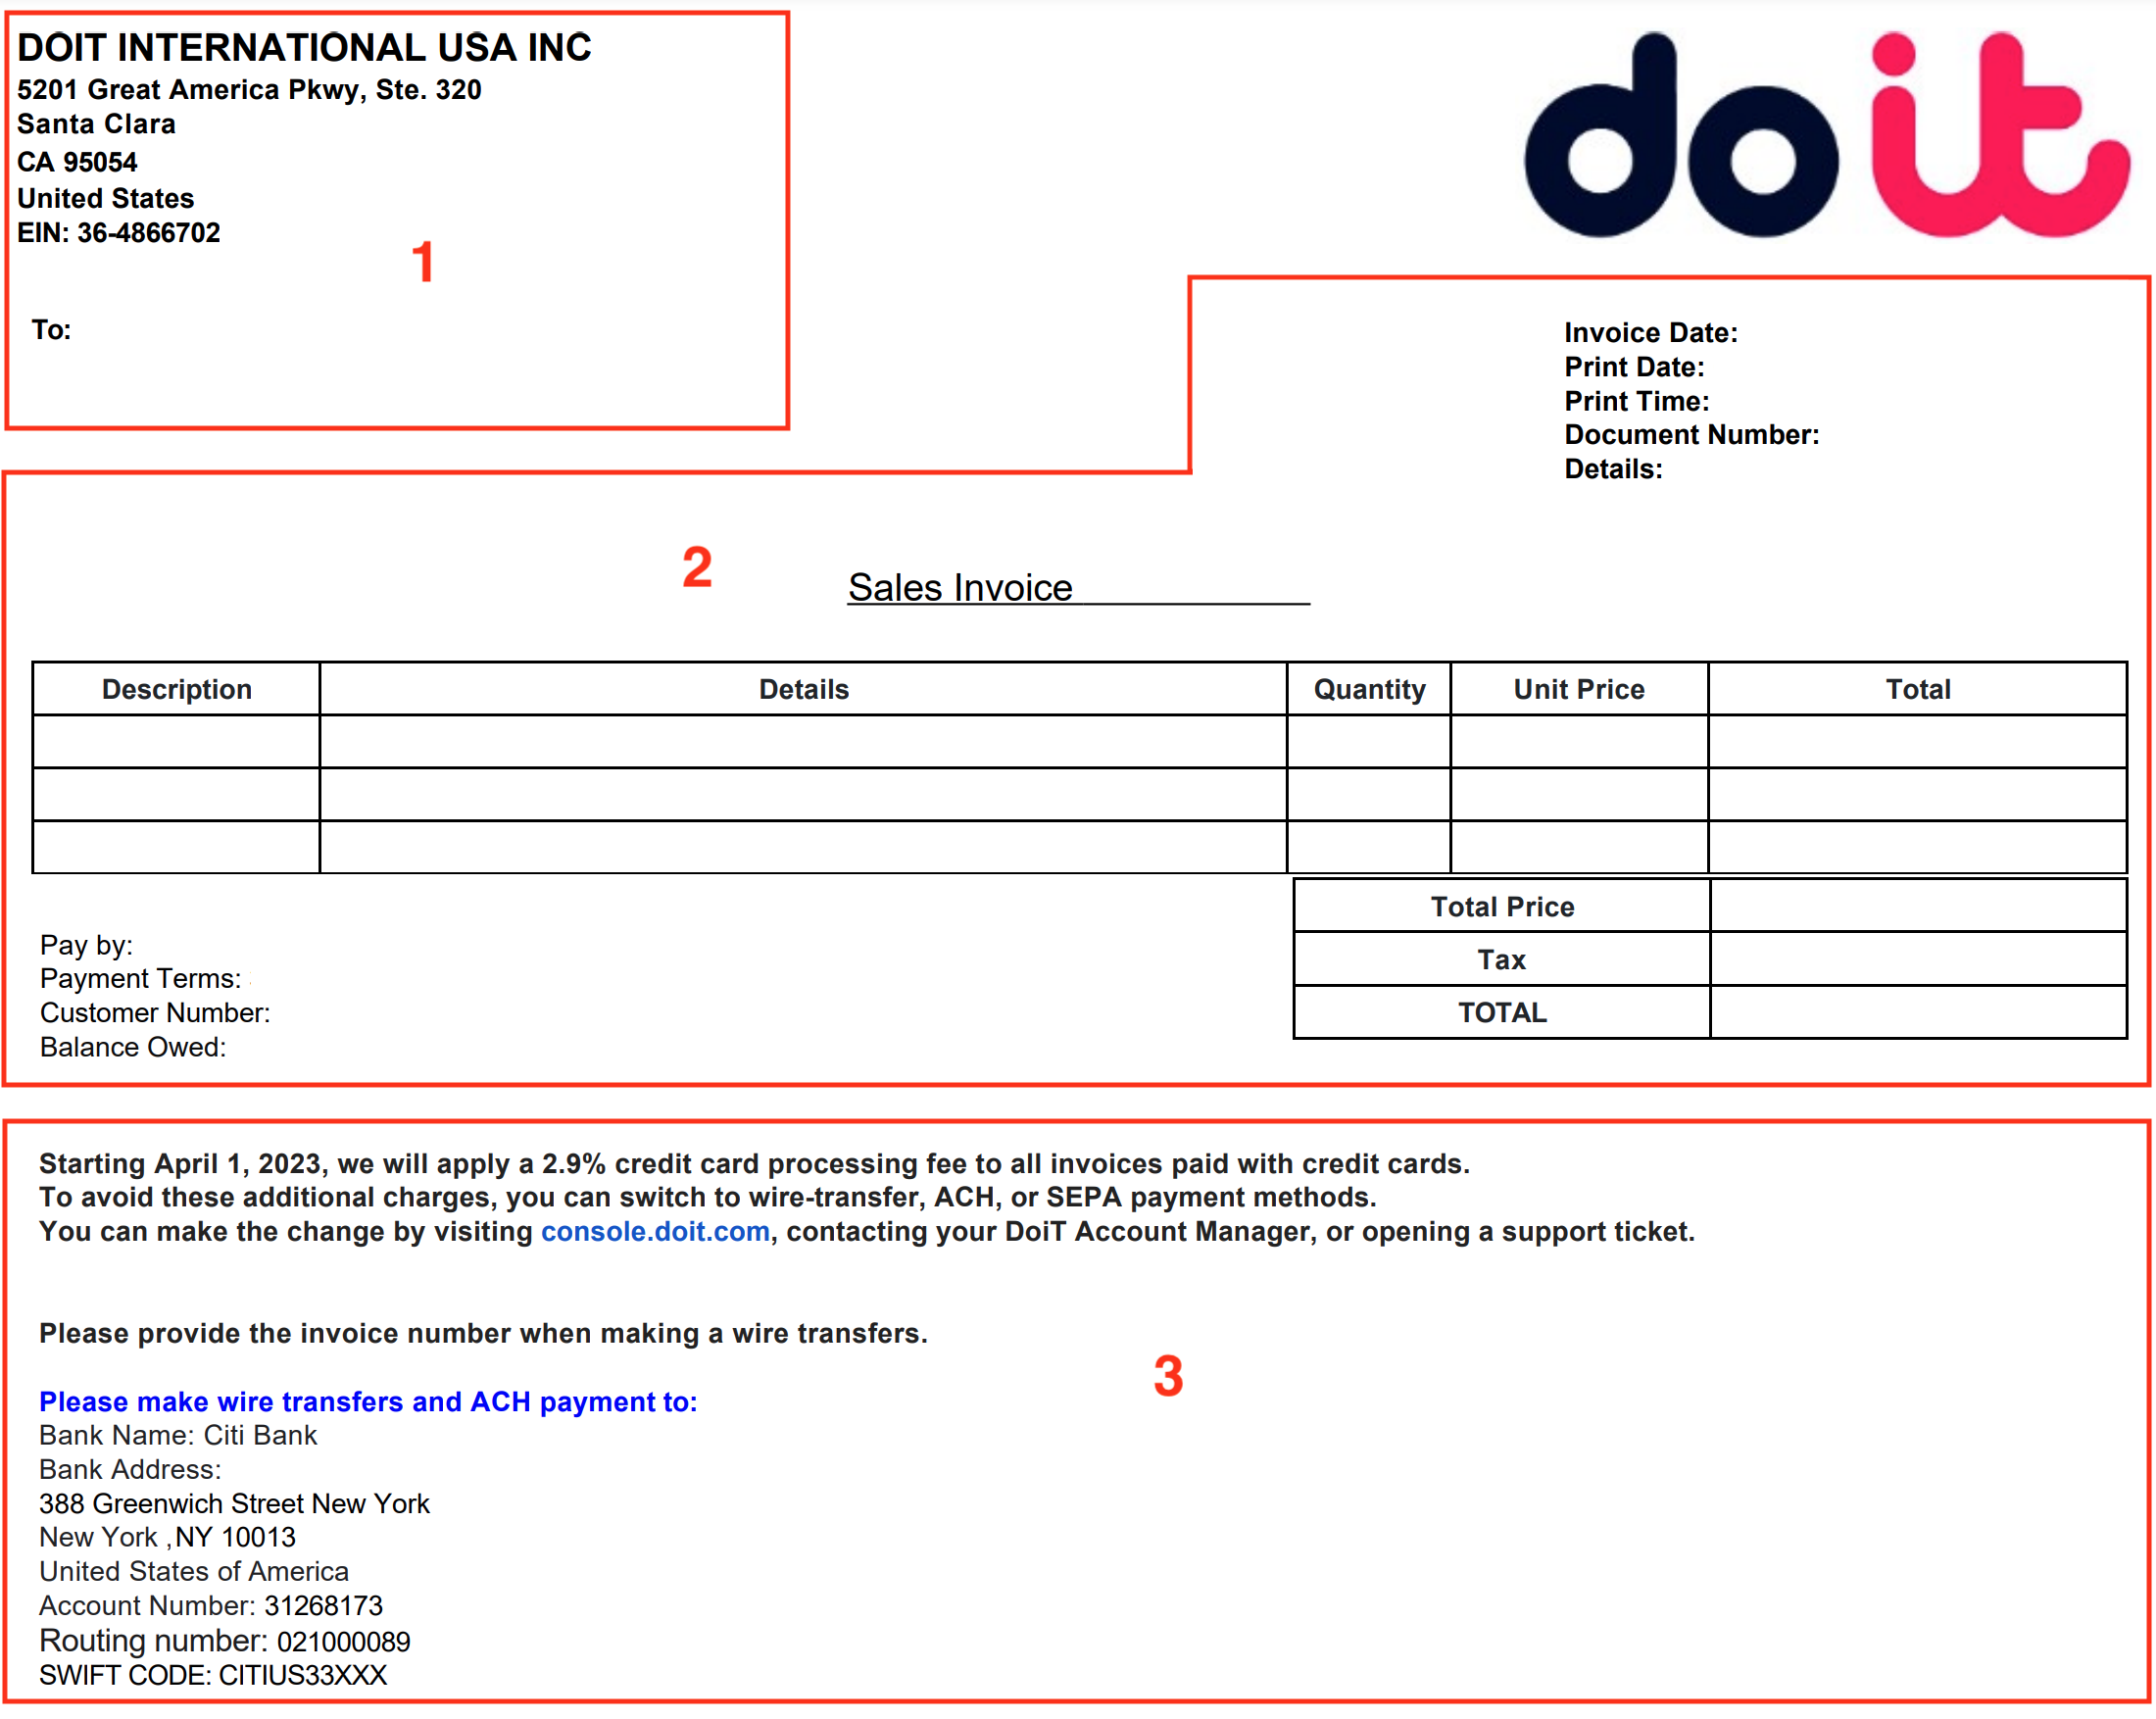 An example PDF invoice